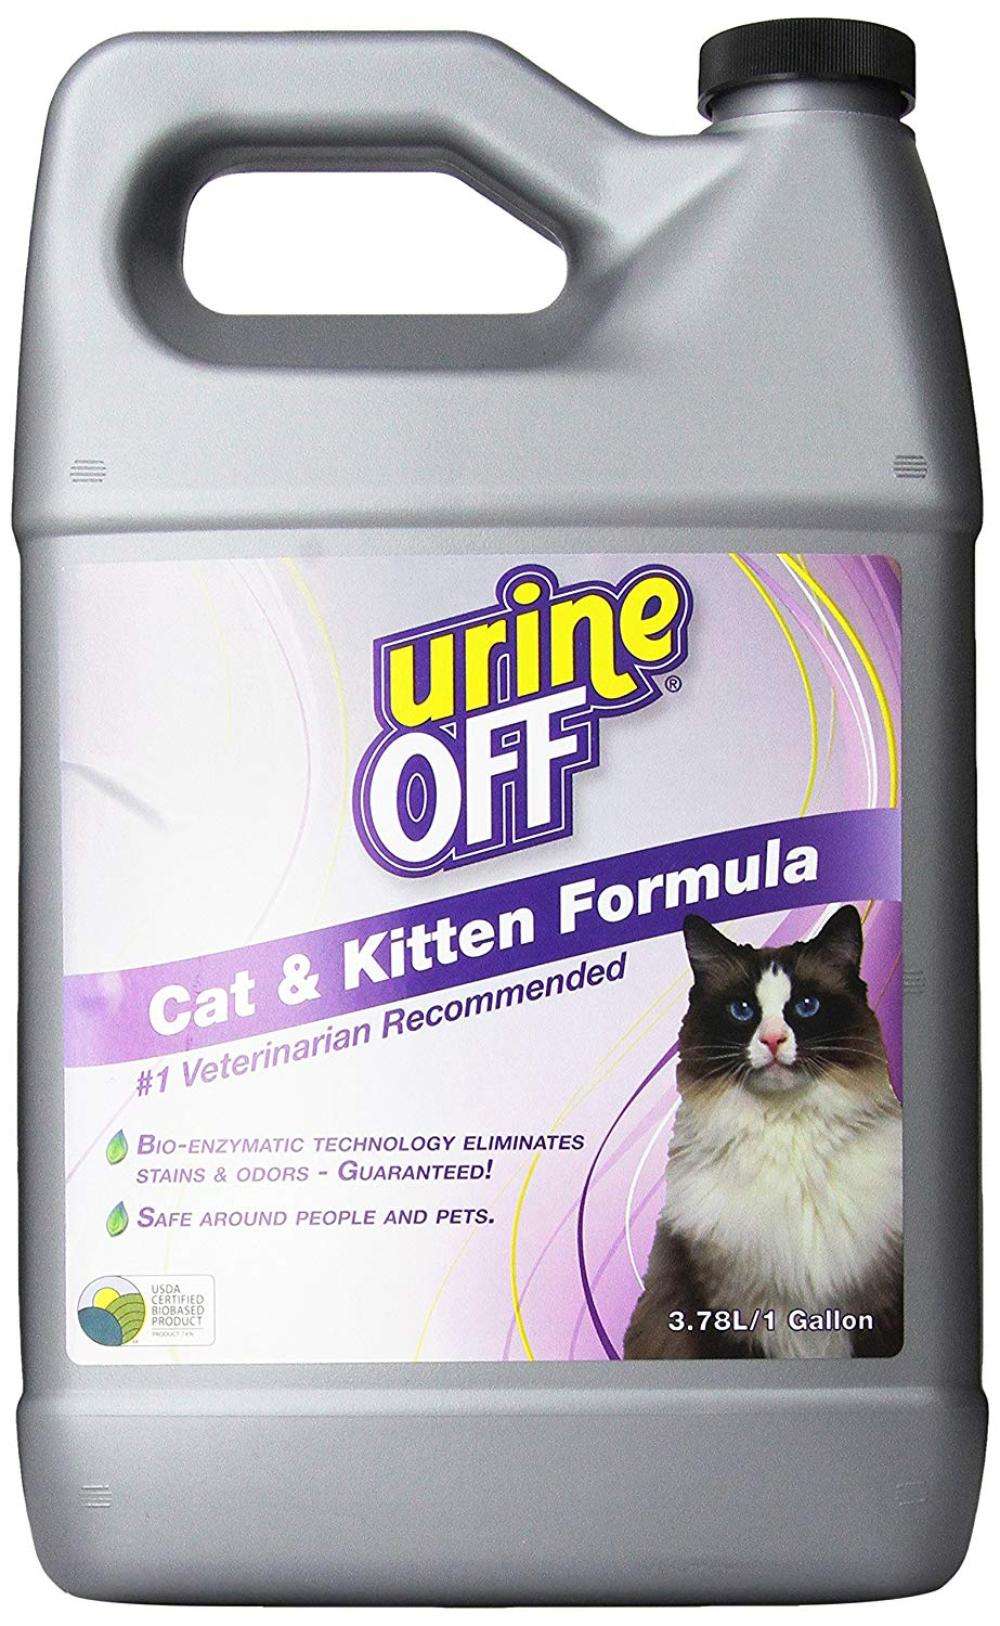 Urine Off Odor and Stain Remover for Cats, 1 Gallon, Guaranteed to ...